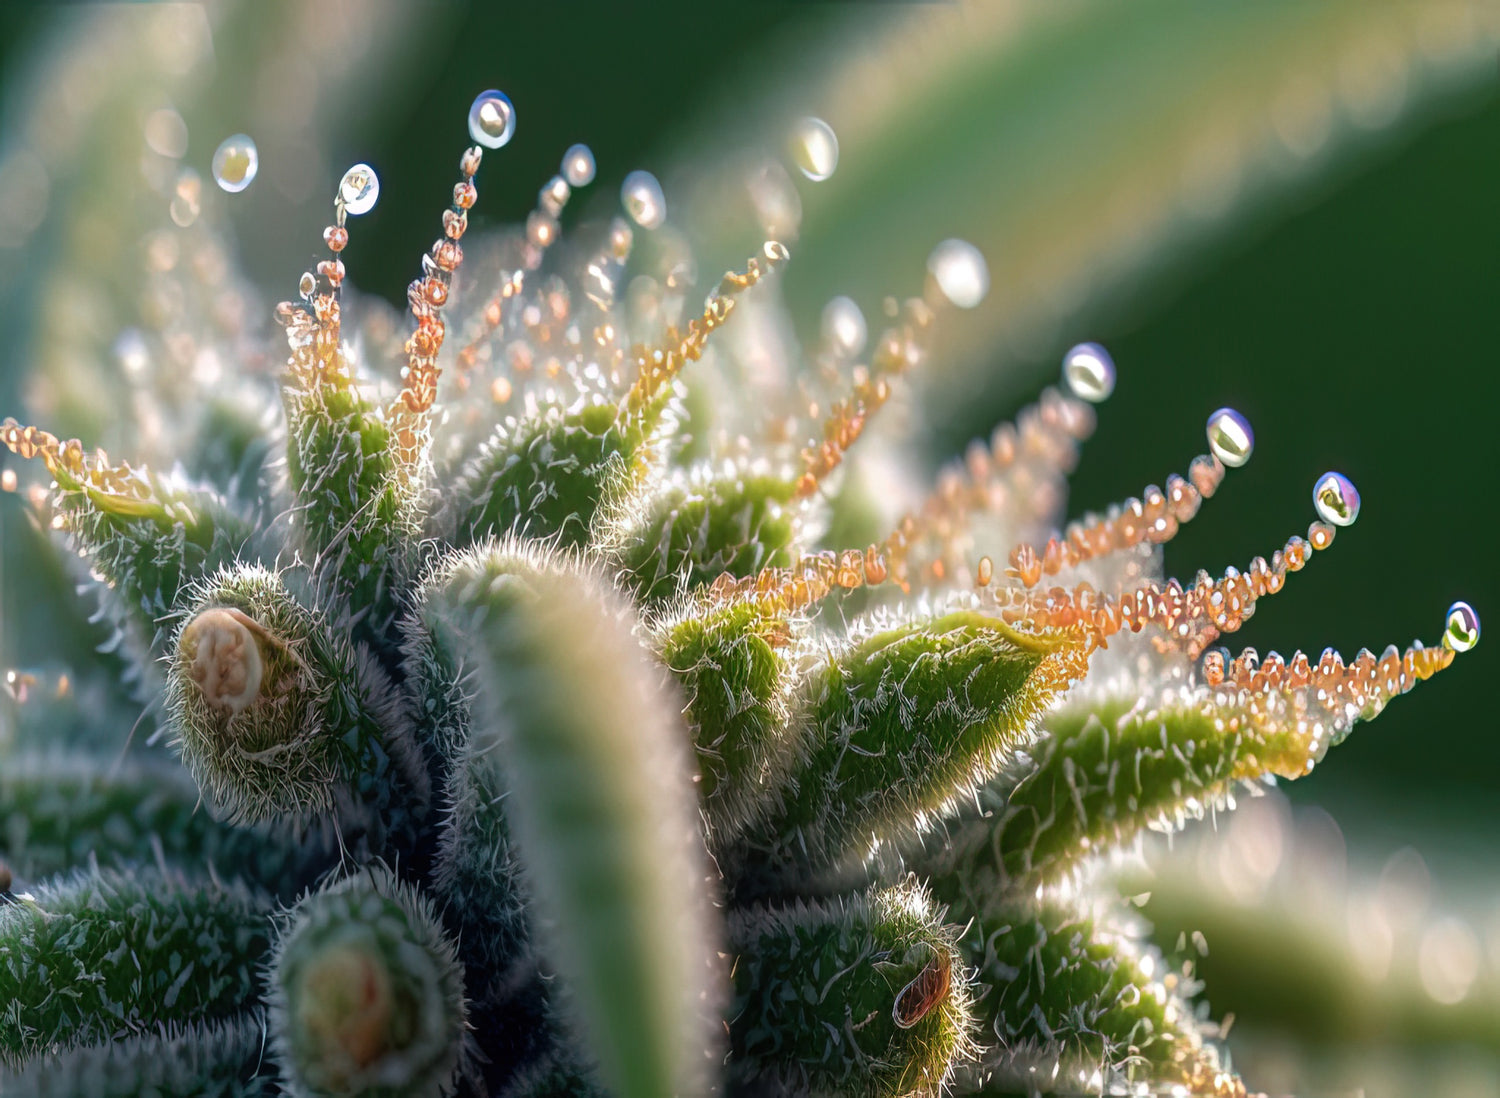 How to Boost Trichome Production in Cannabis